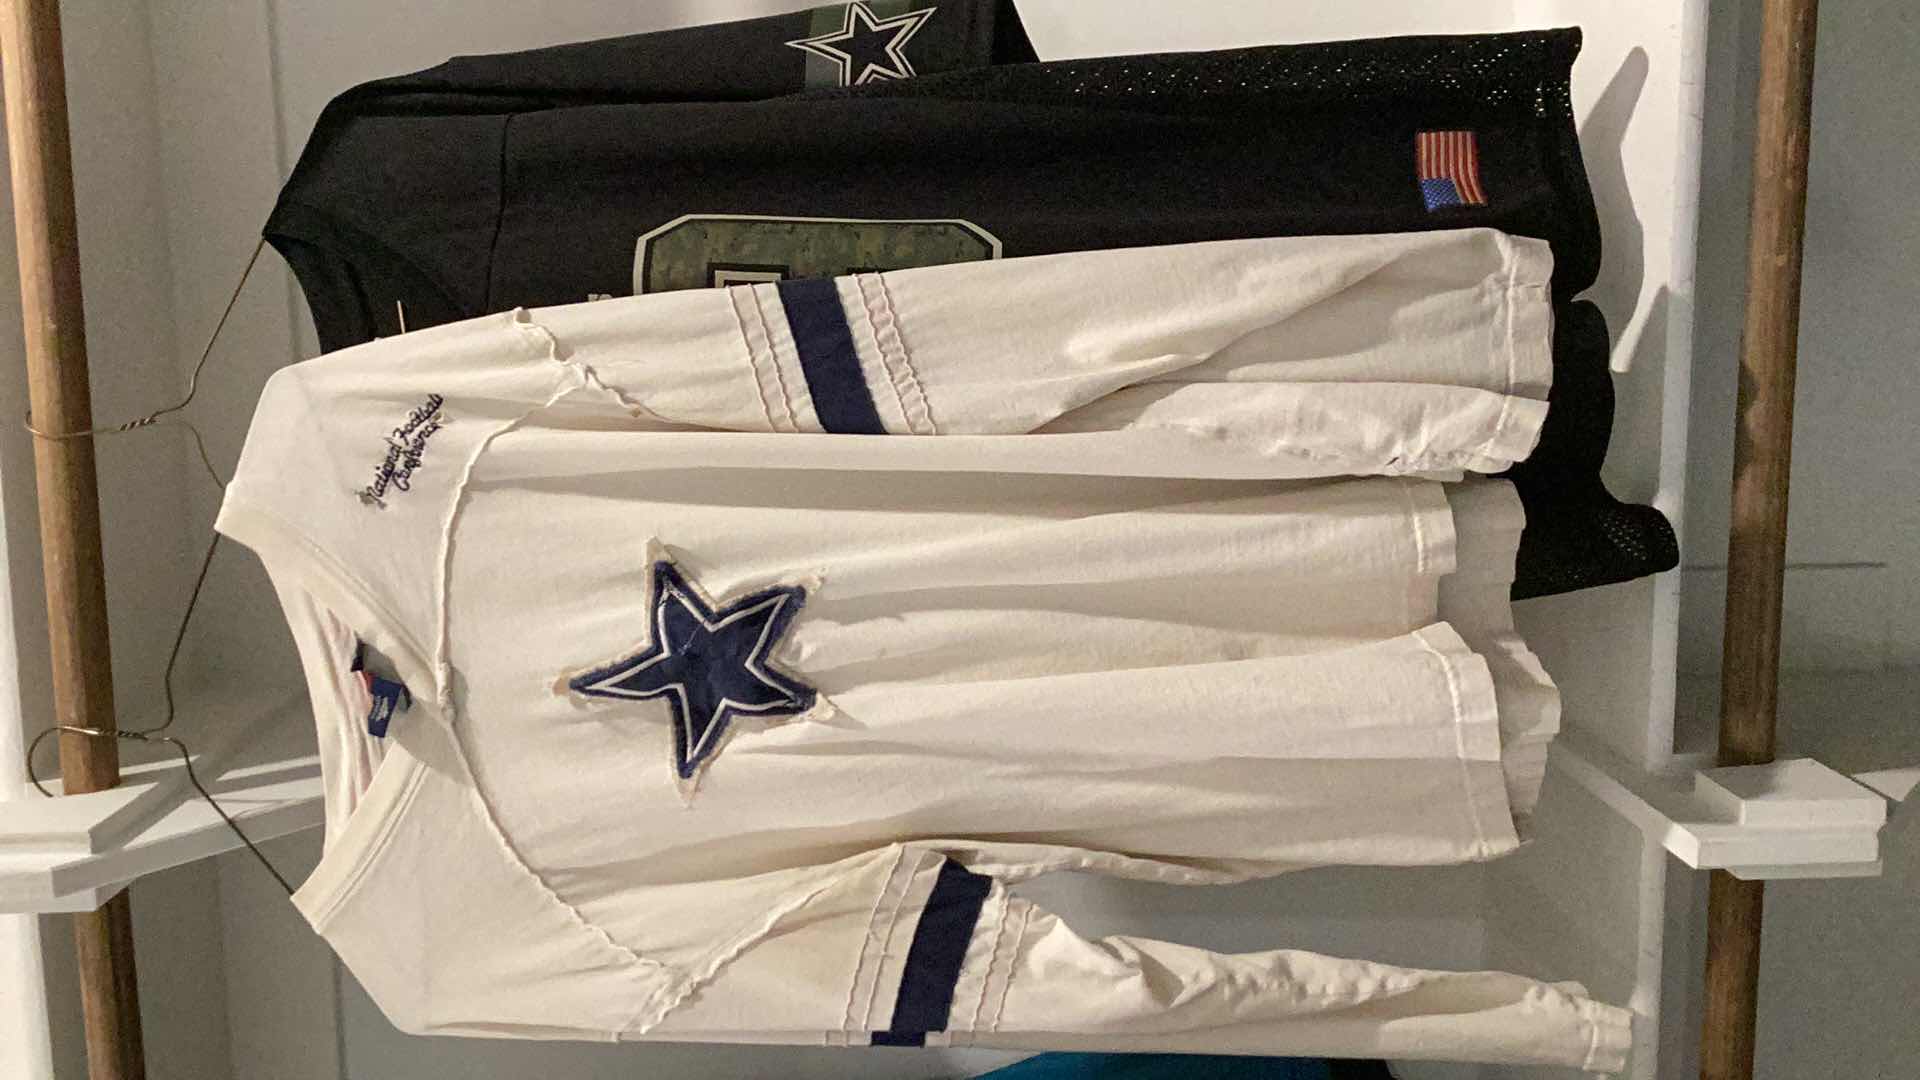 Photo 3 of DALLAS COWBOYS JERSEY WITH COOPER 19 AND A DALLAS COWBOYS TEE SHIRT. SIZES ARE M AND LARGE.